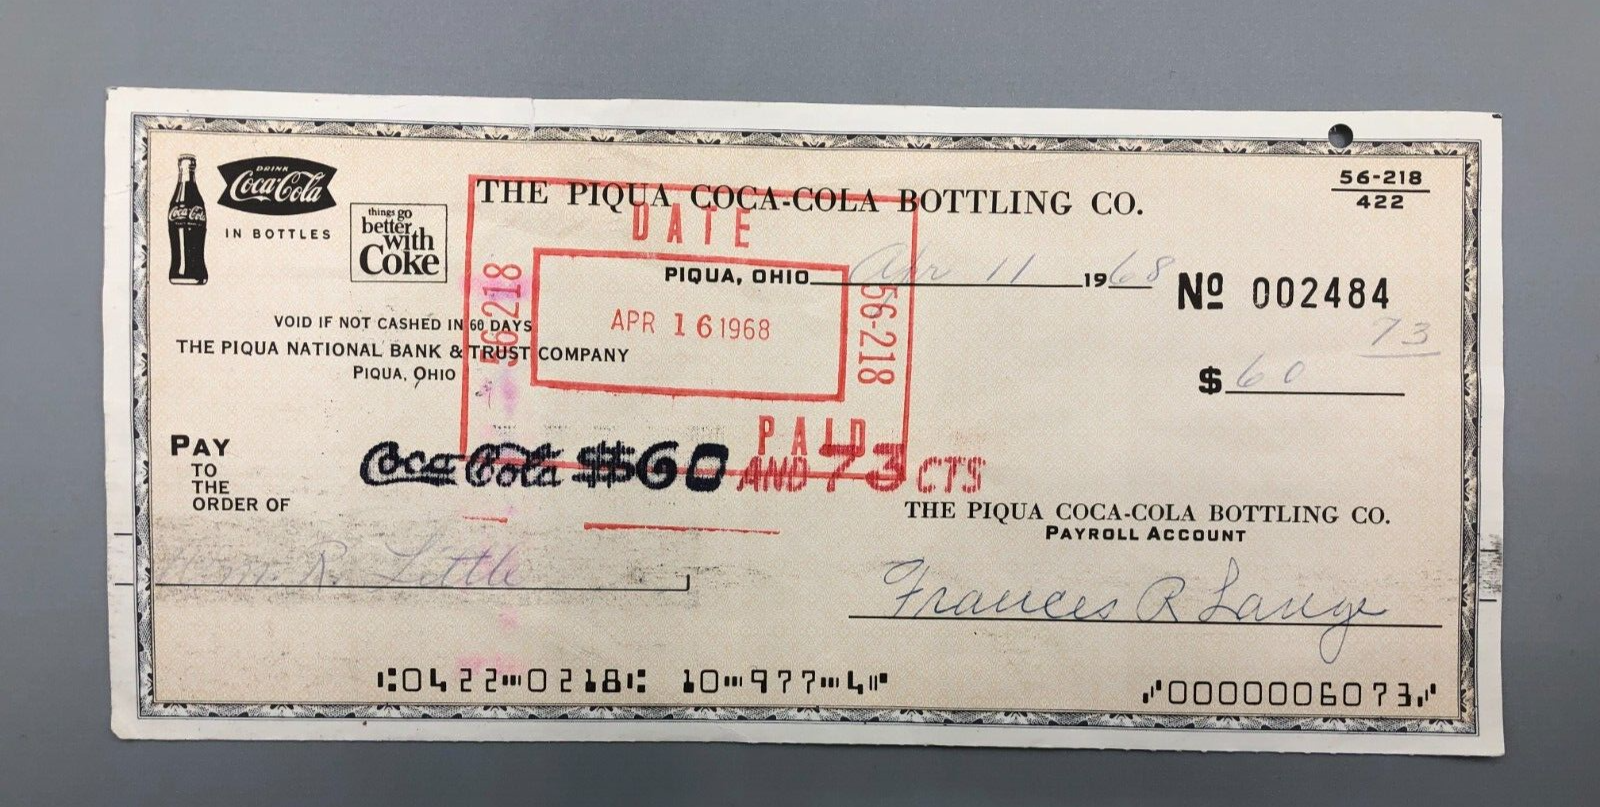 EP22: Vintage 1968 Coca-Cola Cashed Check paycheck for $60.73 1 week wages!